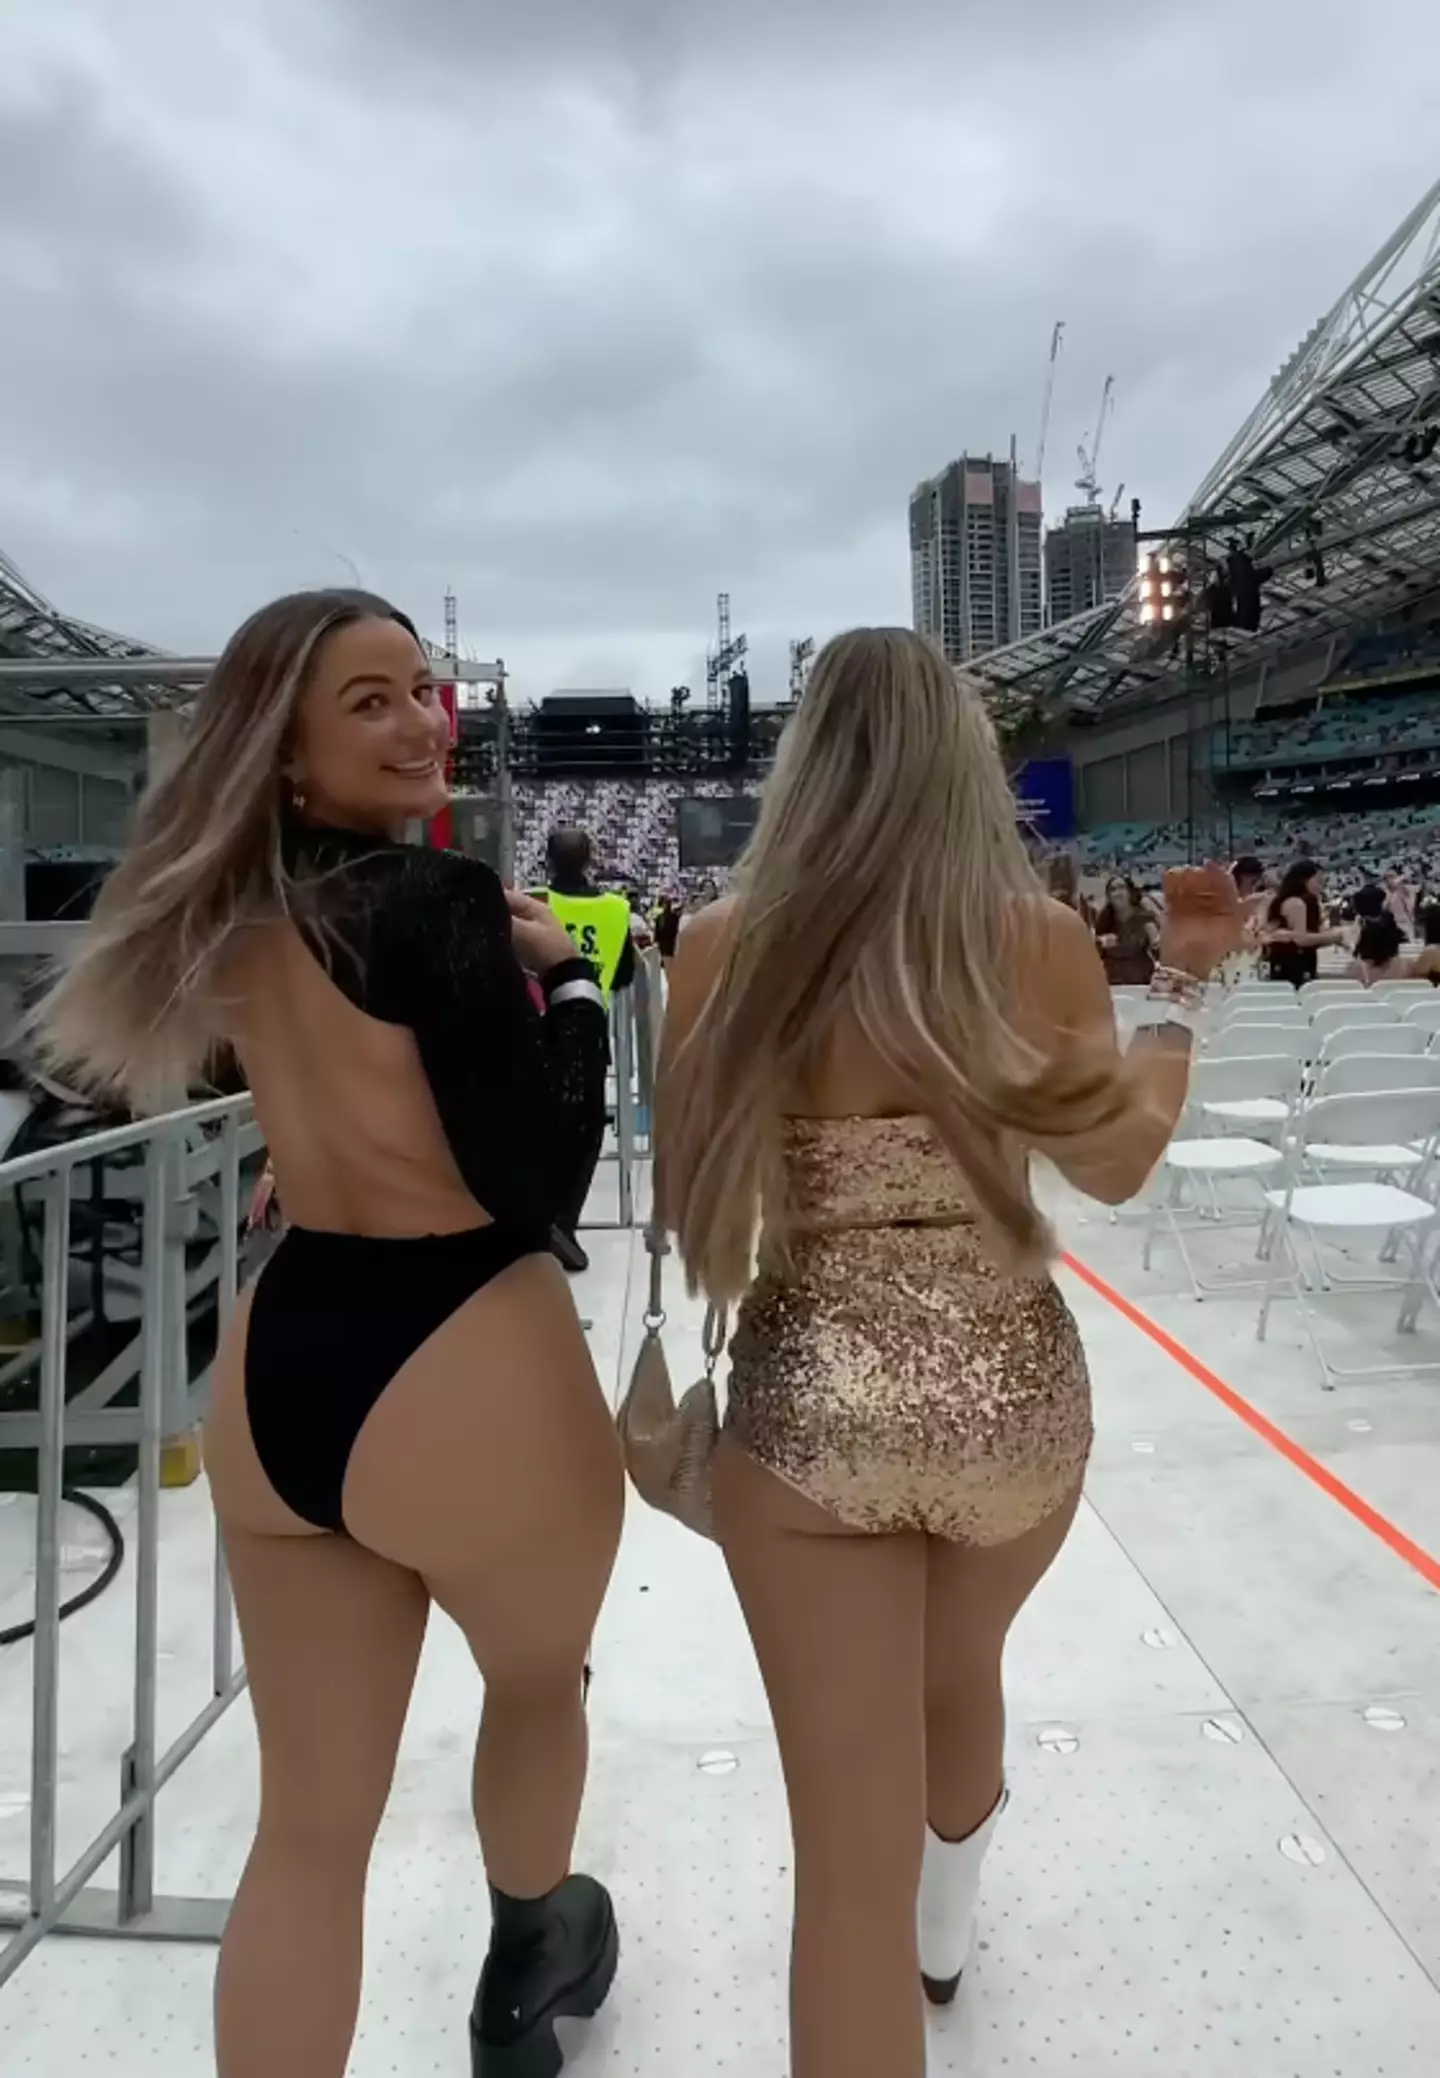 Some social media users thought the influencer's outfit was too revealing.